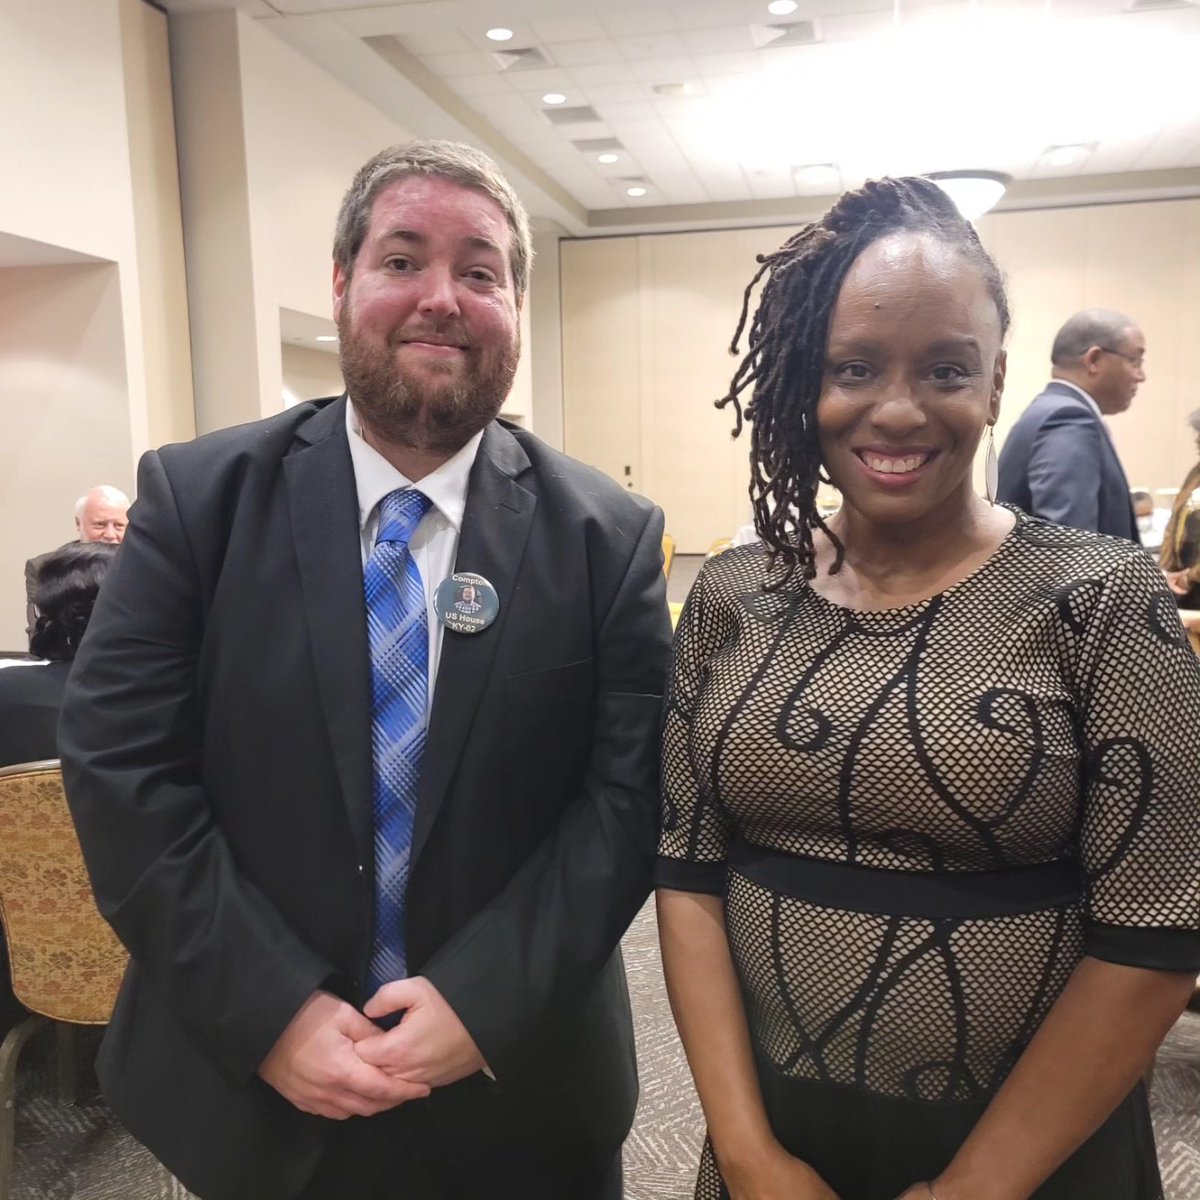 Tonight I got to attend the NAACP Freedom Fund Gala put on by the @naacpbgwc. It was an amazing event that recognized many amazing community members. I also was able to listen to an amazing speech by keynote speaker, and a friend of my, @atticascottky.